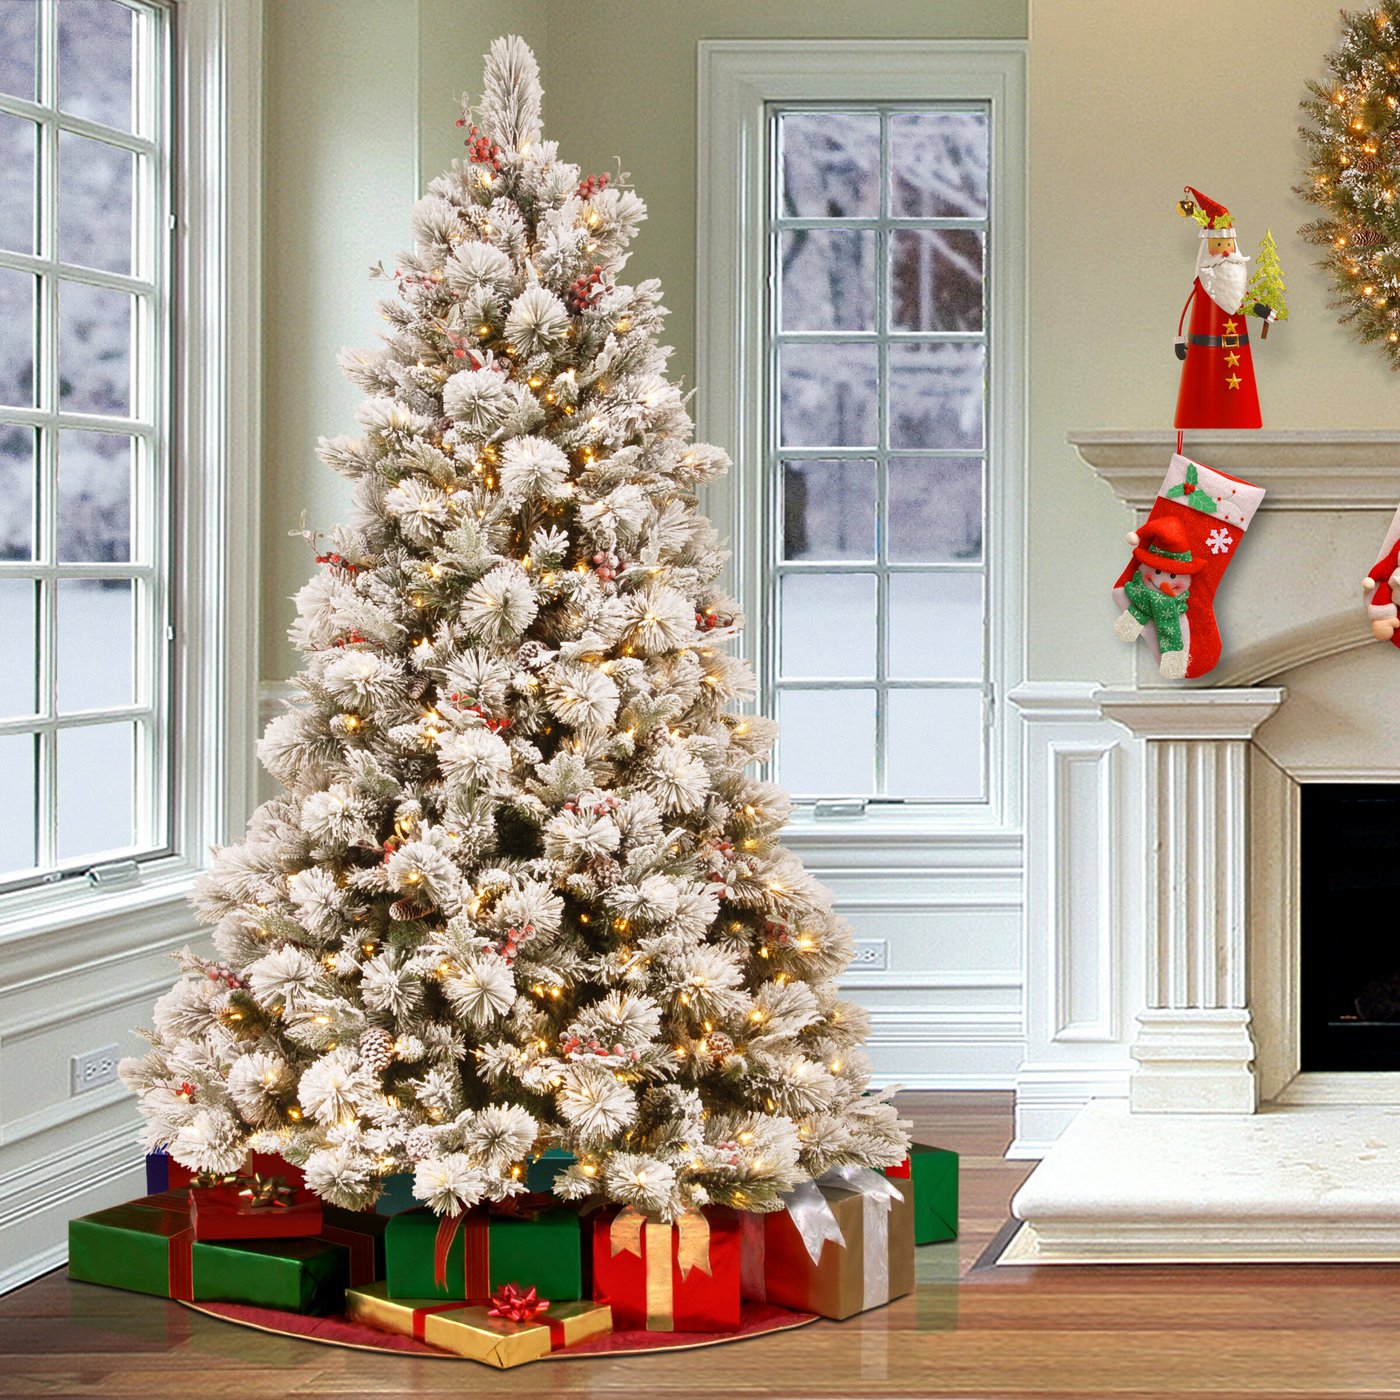 4-expert-tips-to-choose-an-artificial-christmas-tree-visualhunt